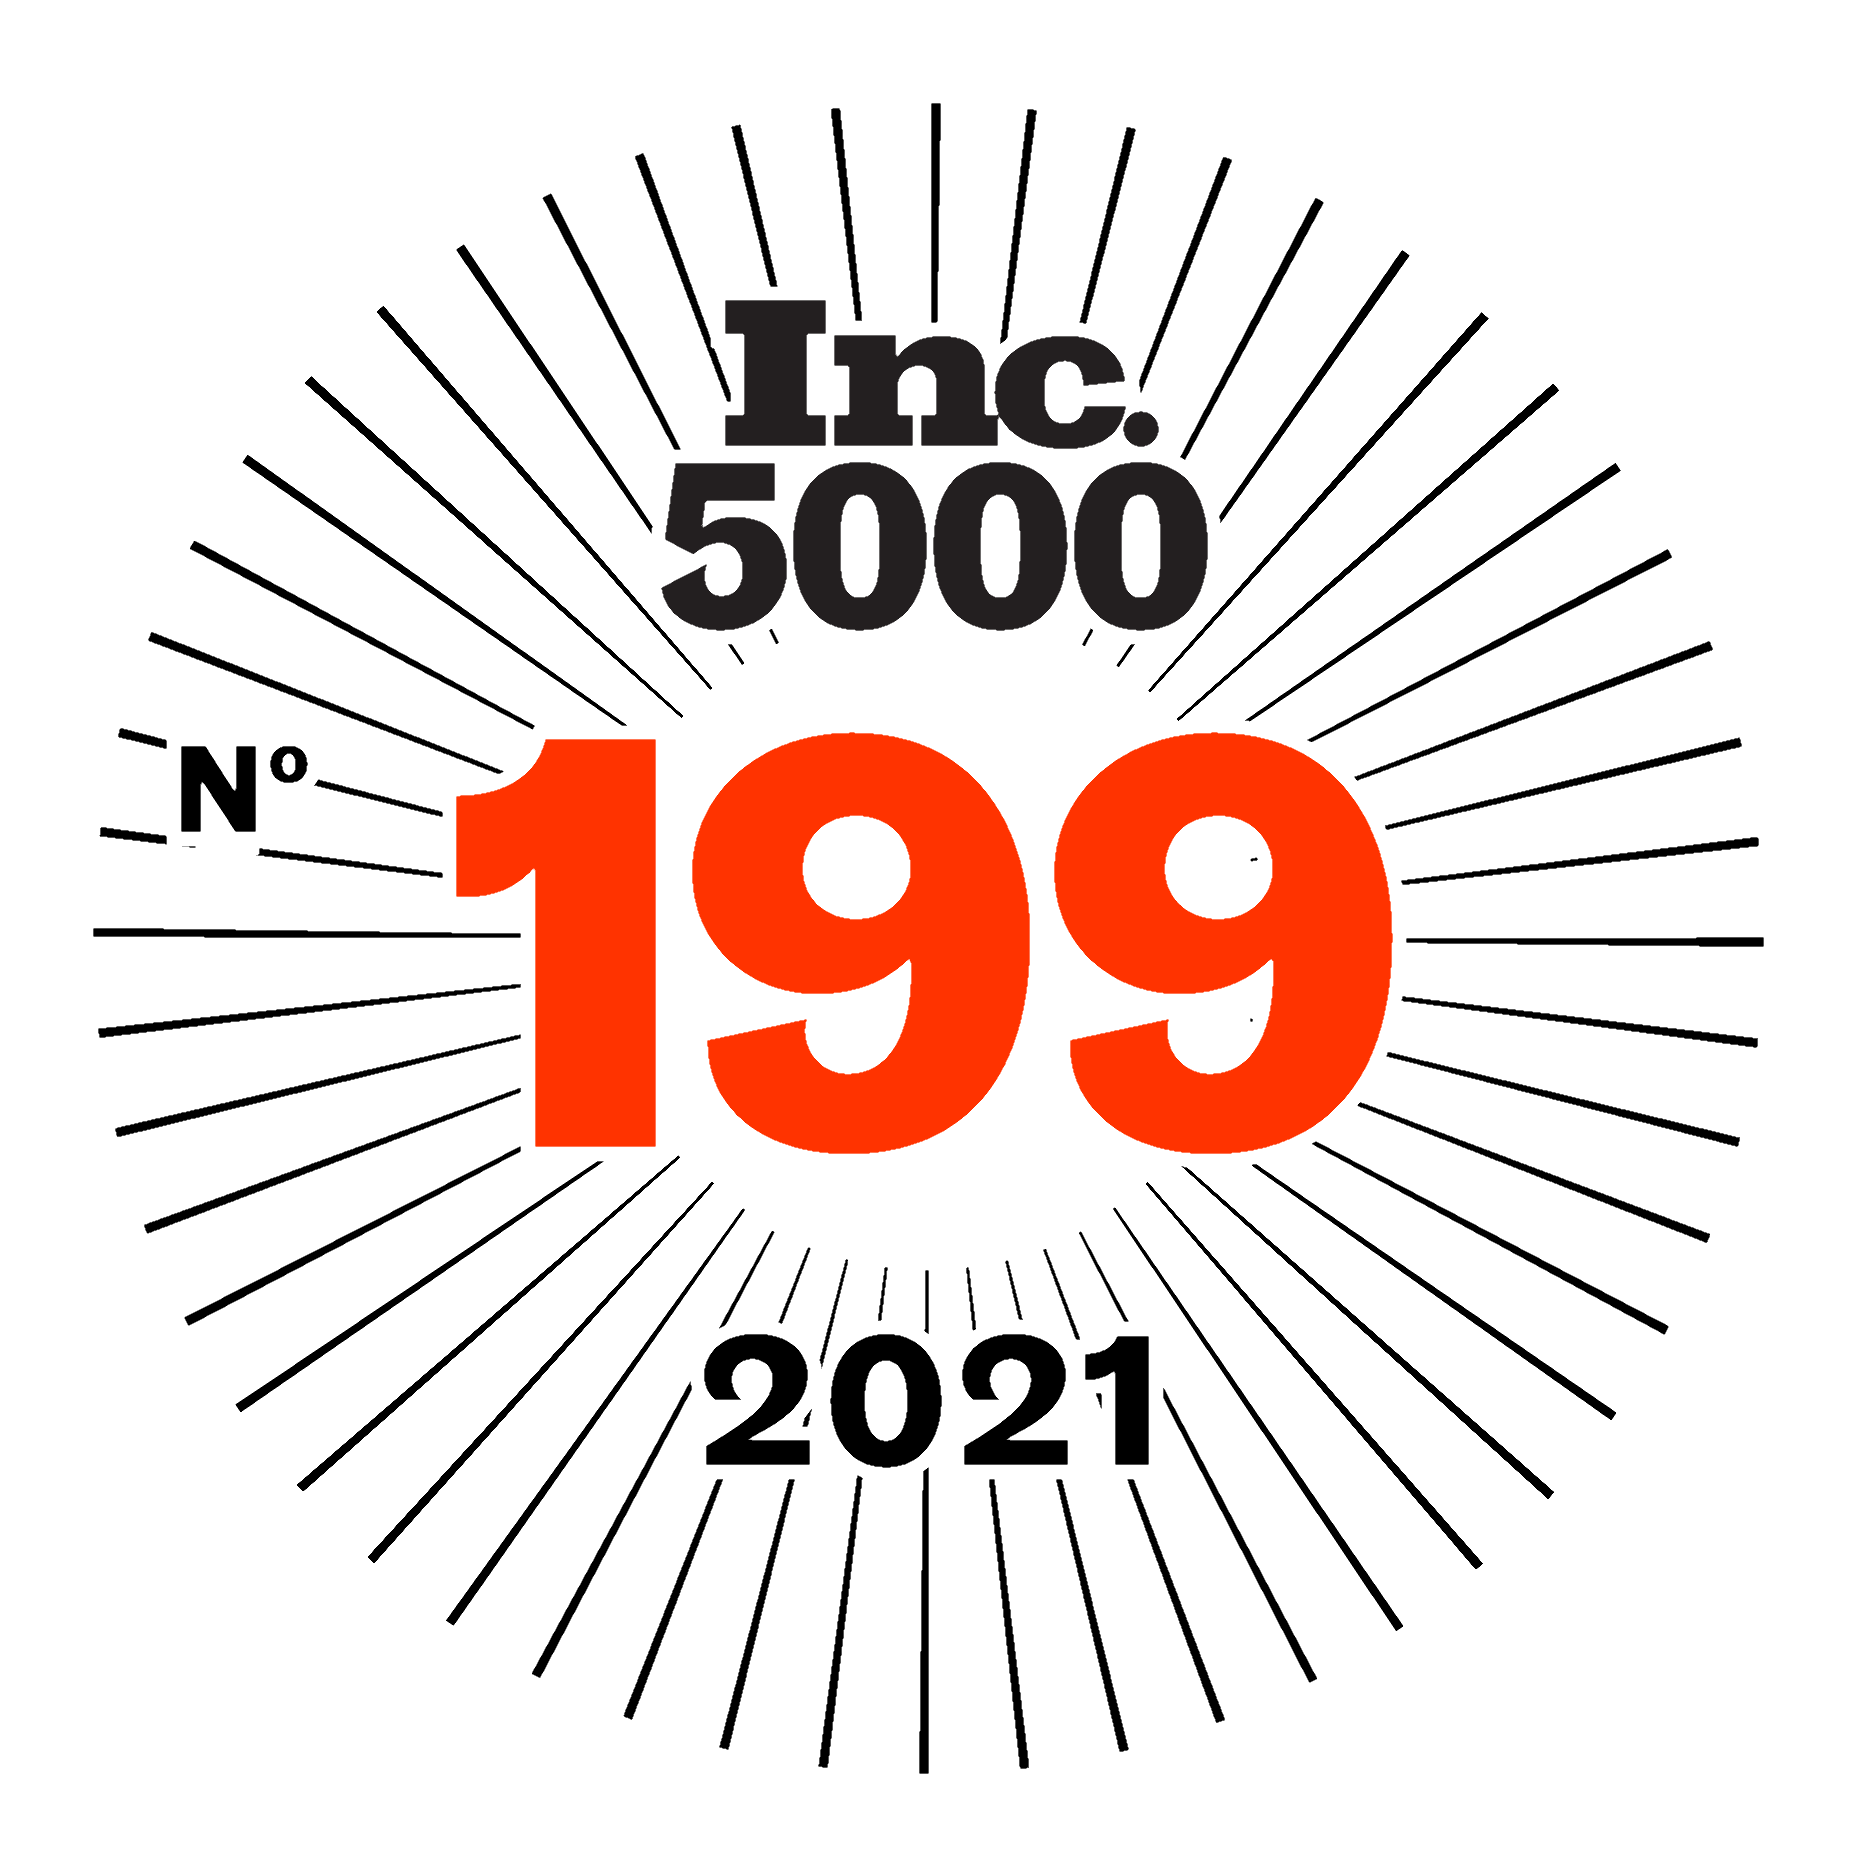 Ranked Number 199 on Inc 5000